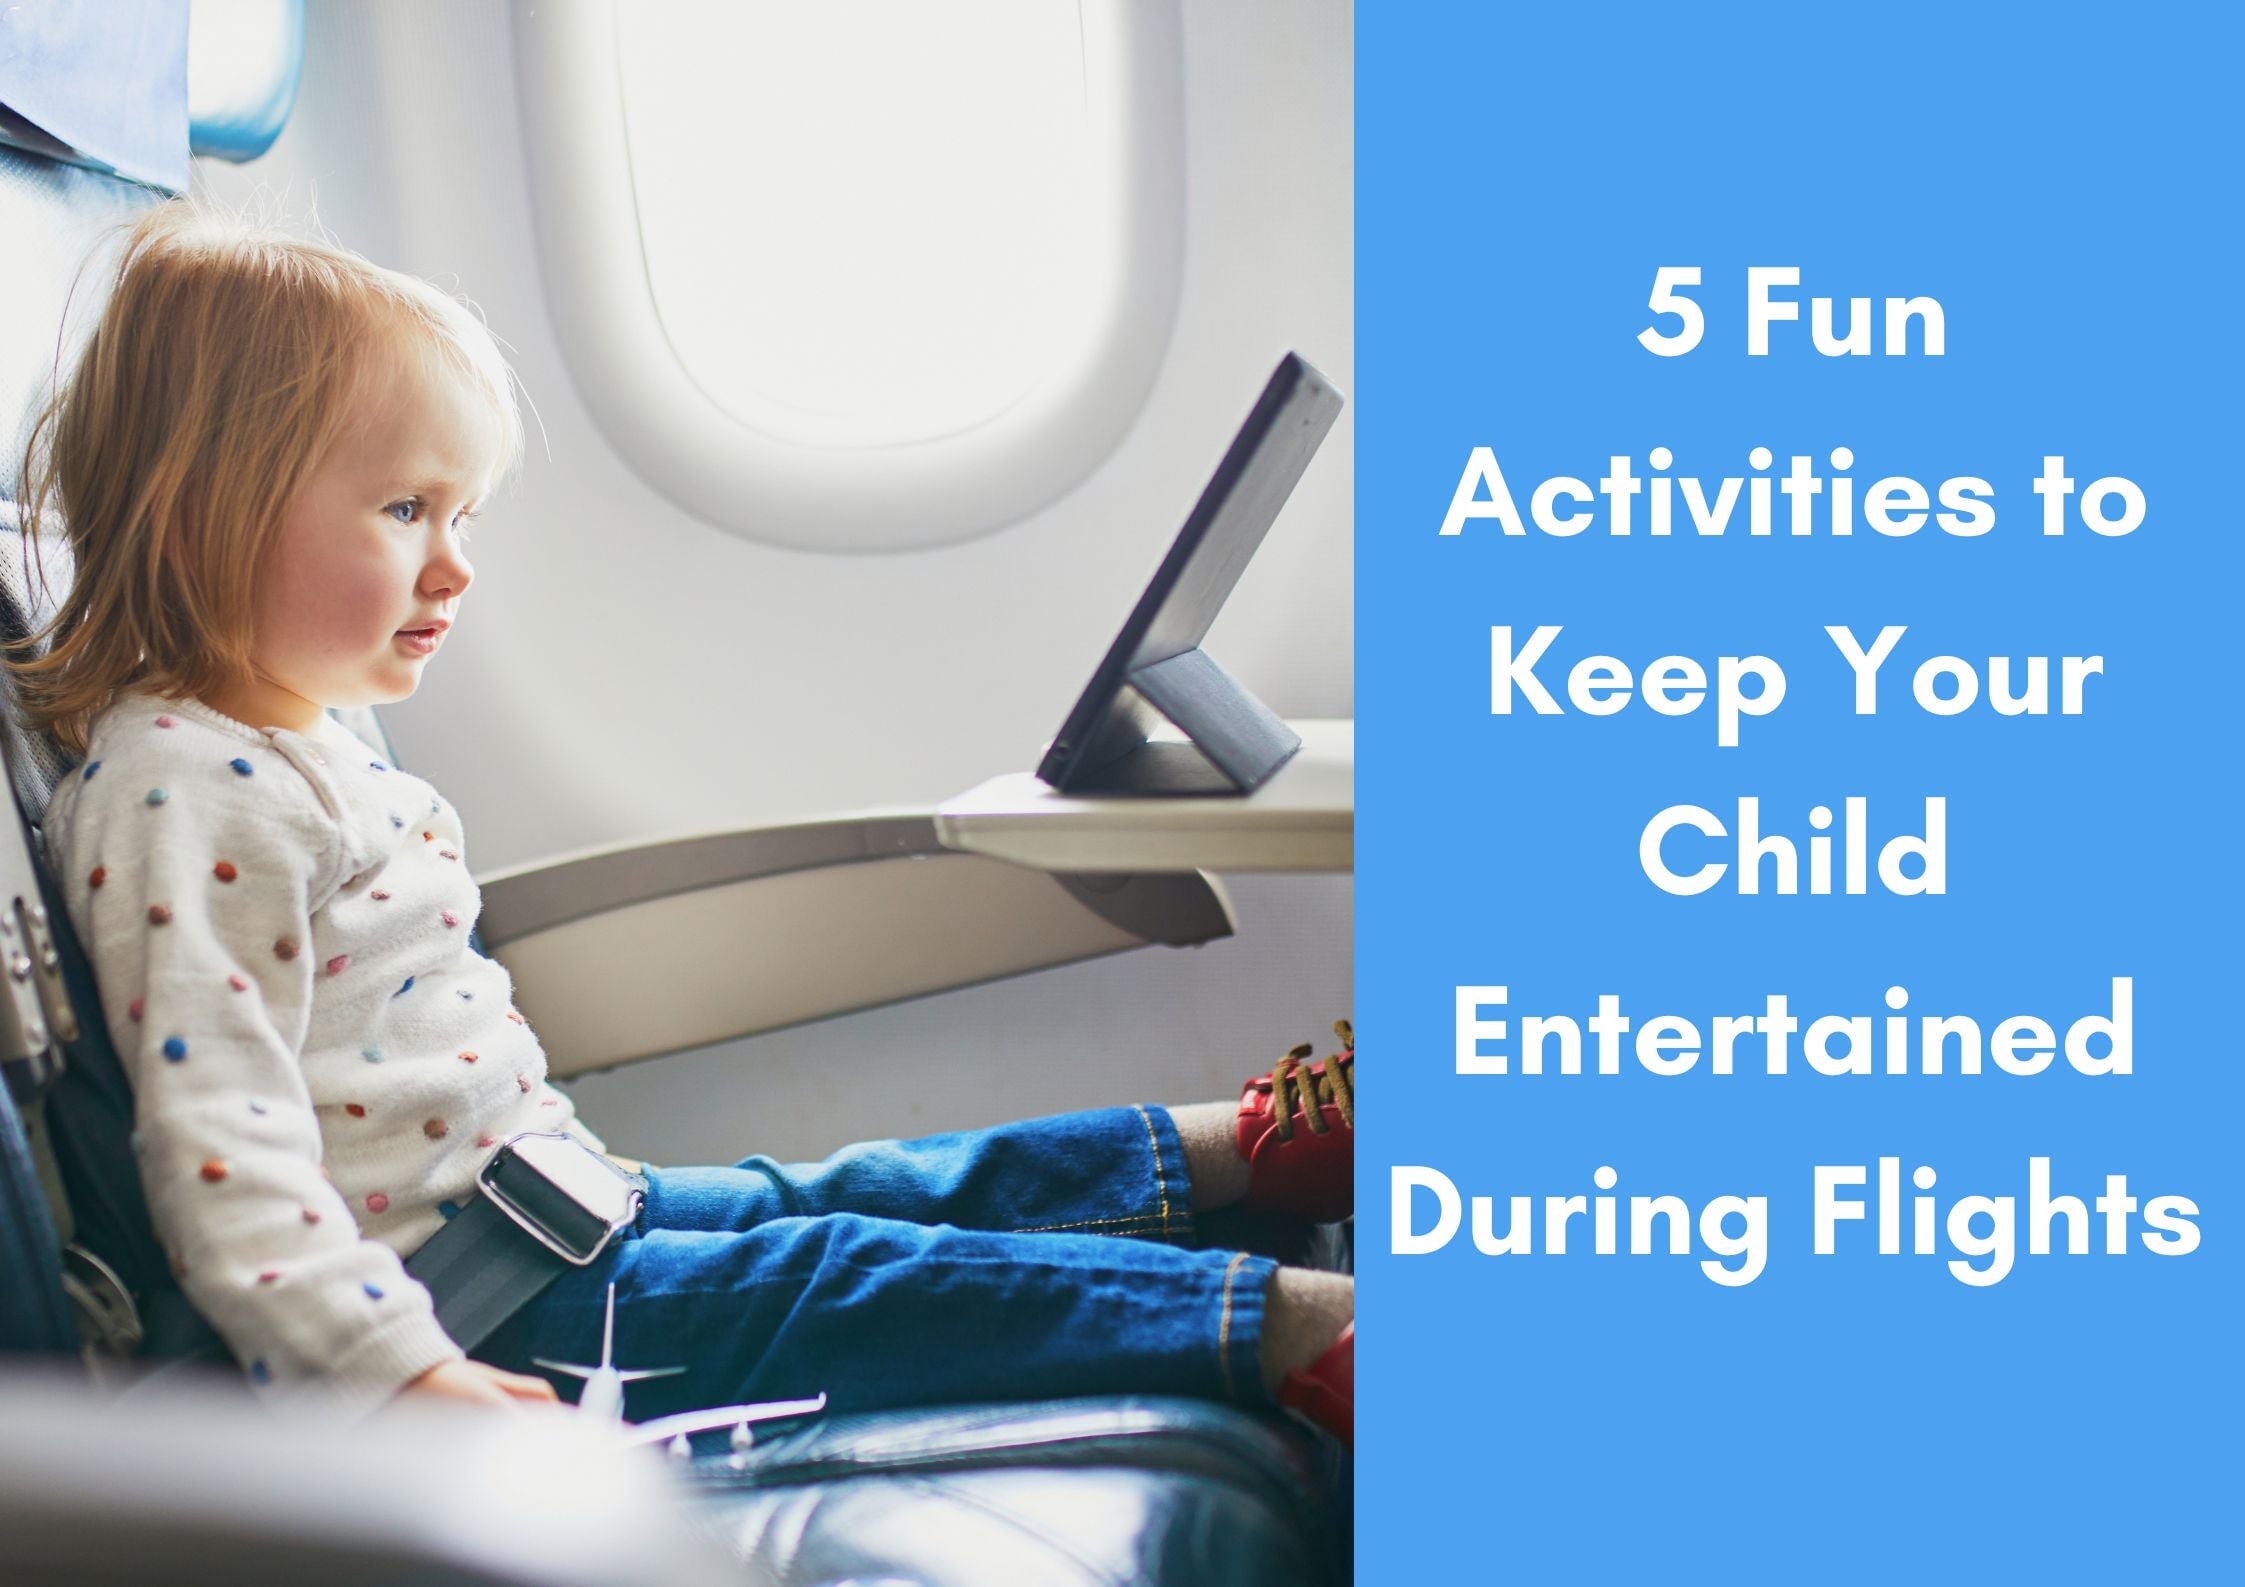 5 Fun Activities to Keep Your Child Entertained During Flights